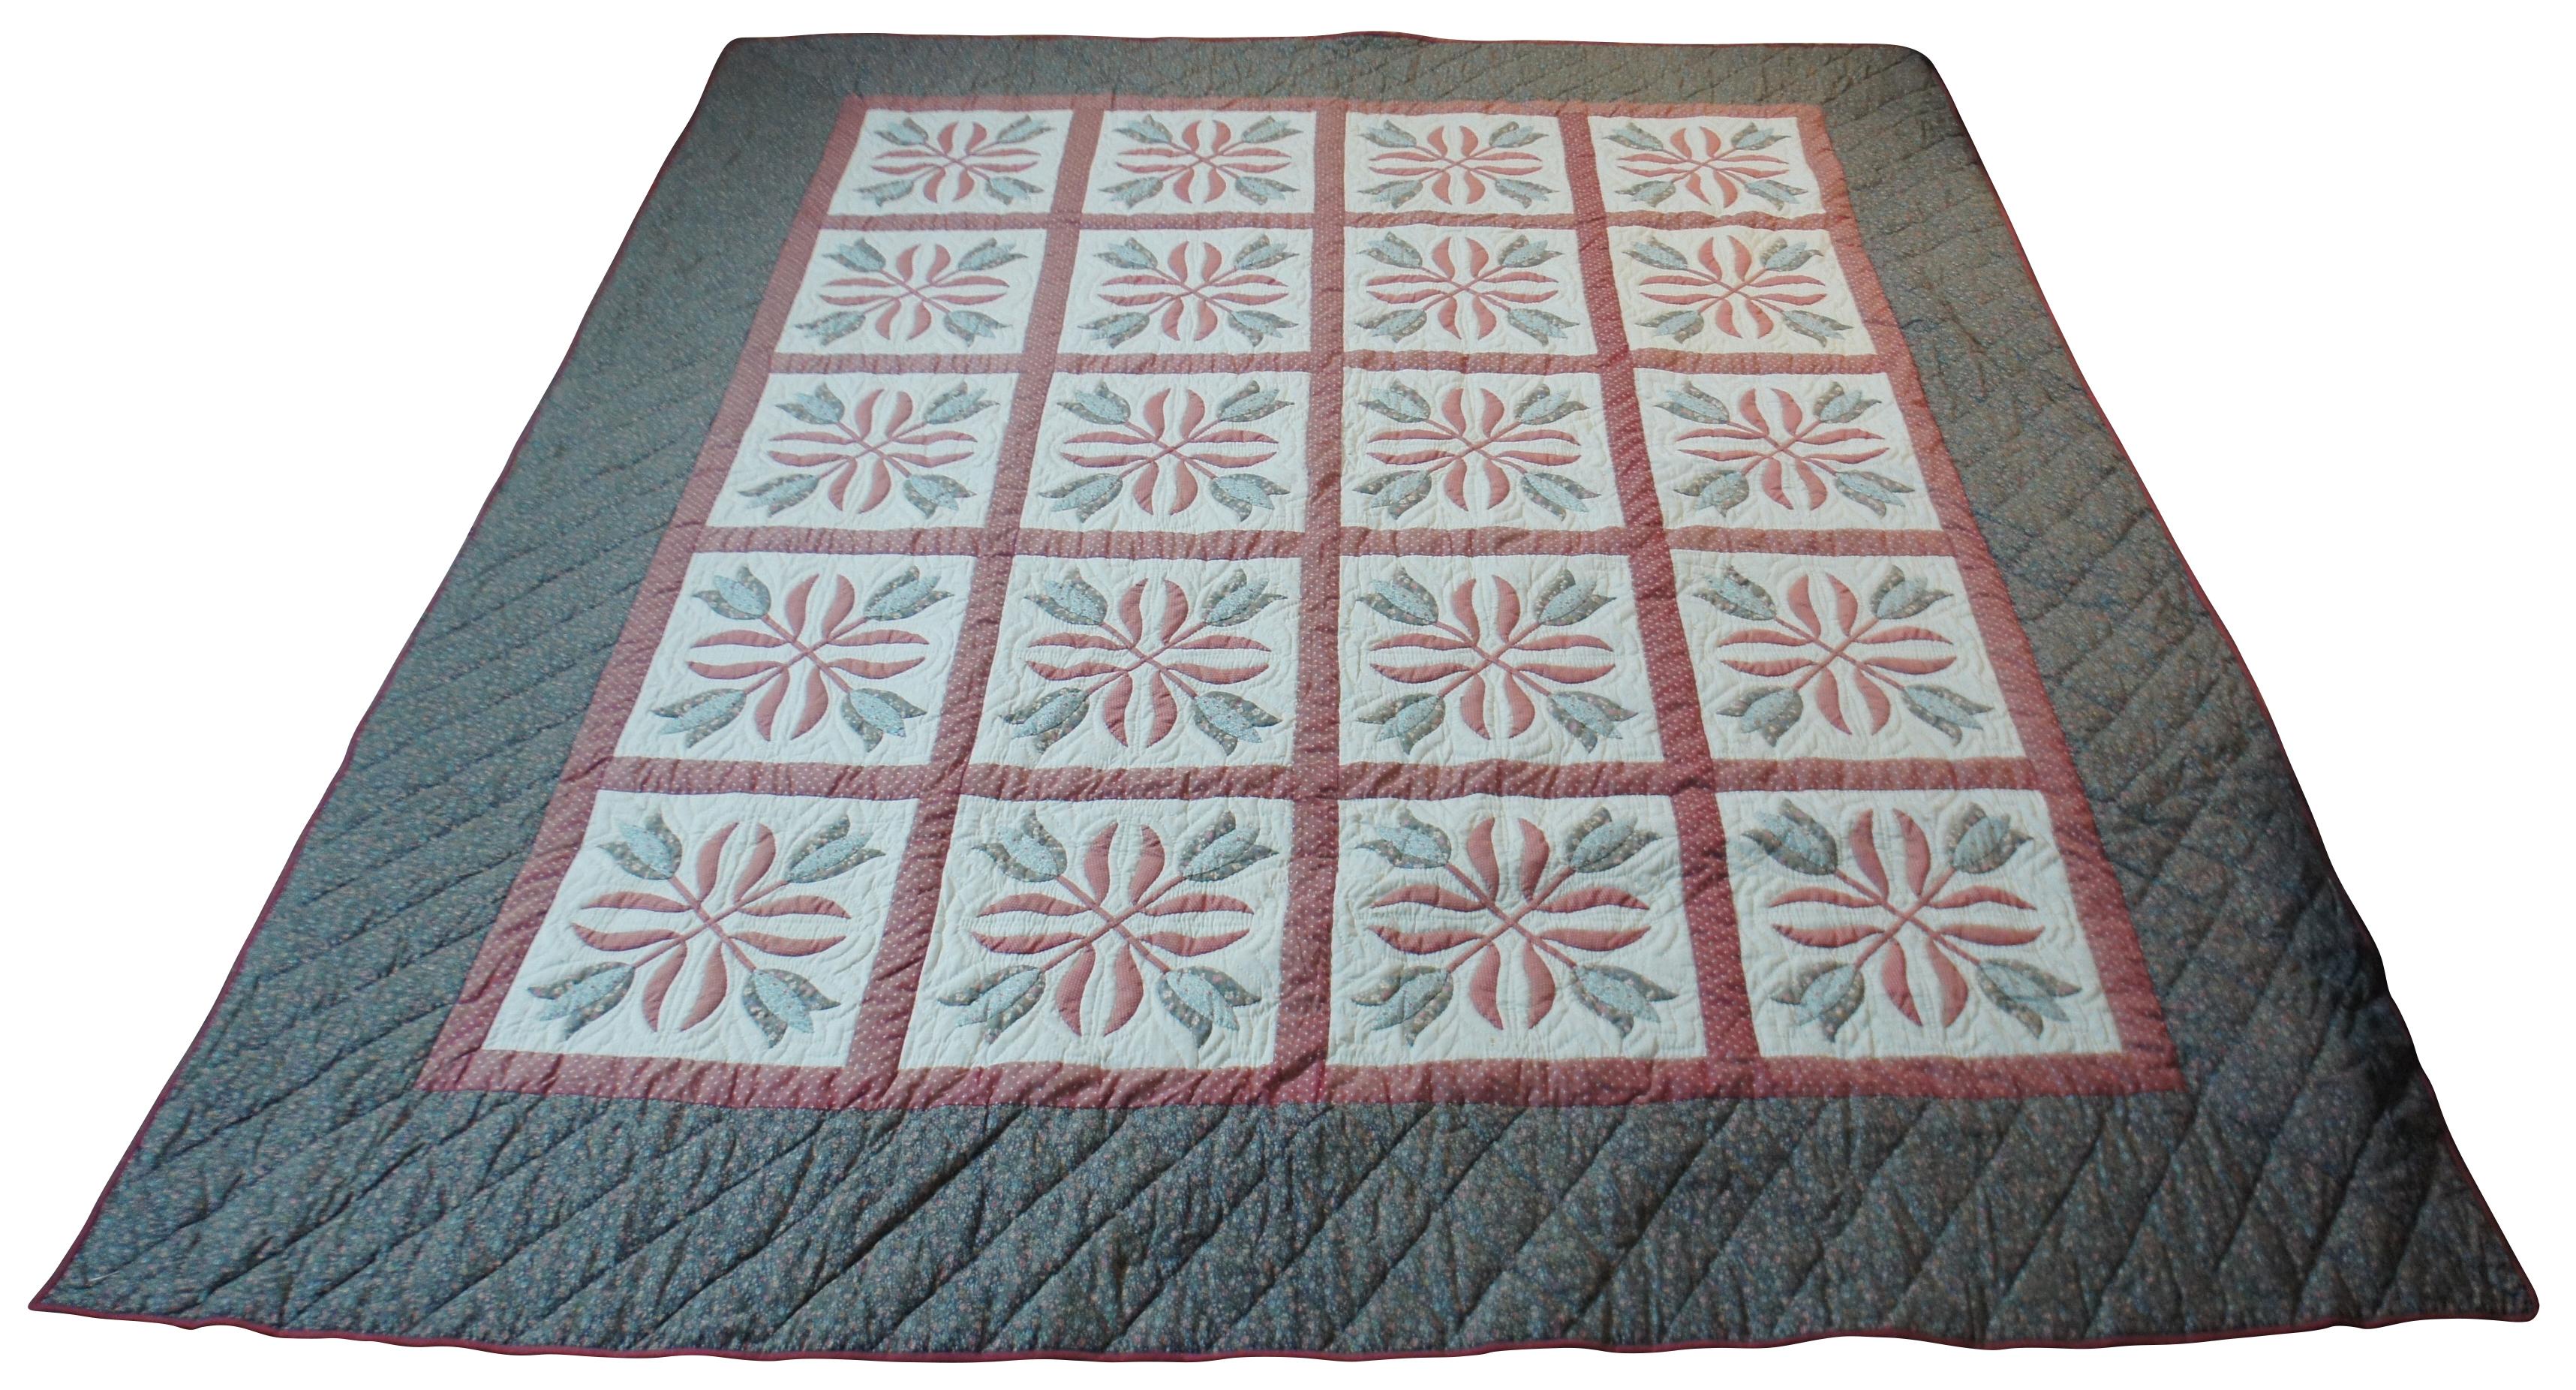 Vintage hand stitched king sized quilt featuring gray-green, mauve and white floral cotton in blocks framing quartets of tulips on the front, a navy blue floral back, and a curtain rod pocket along one edge for using the quilt as a wall hanging.